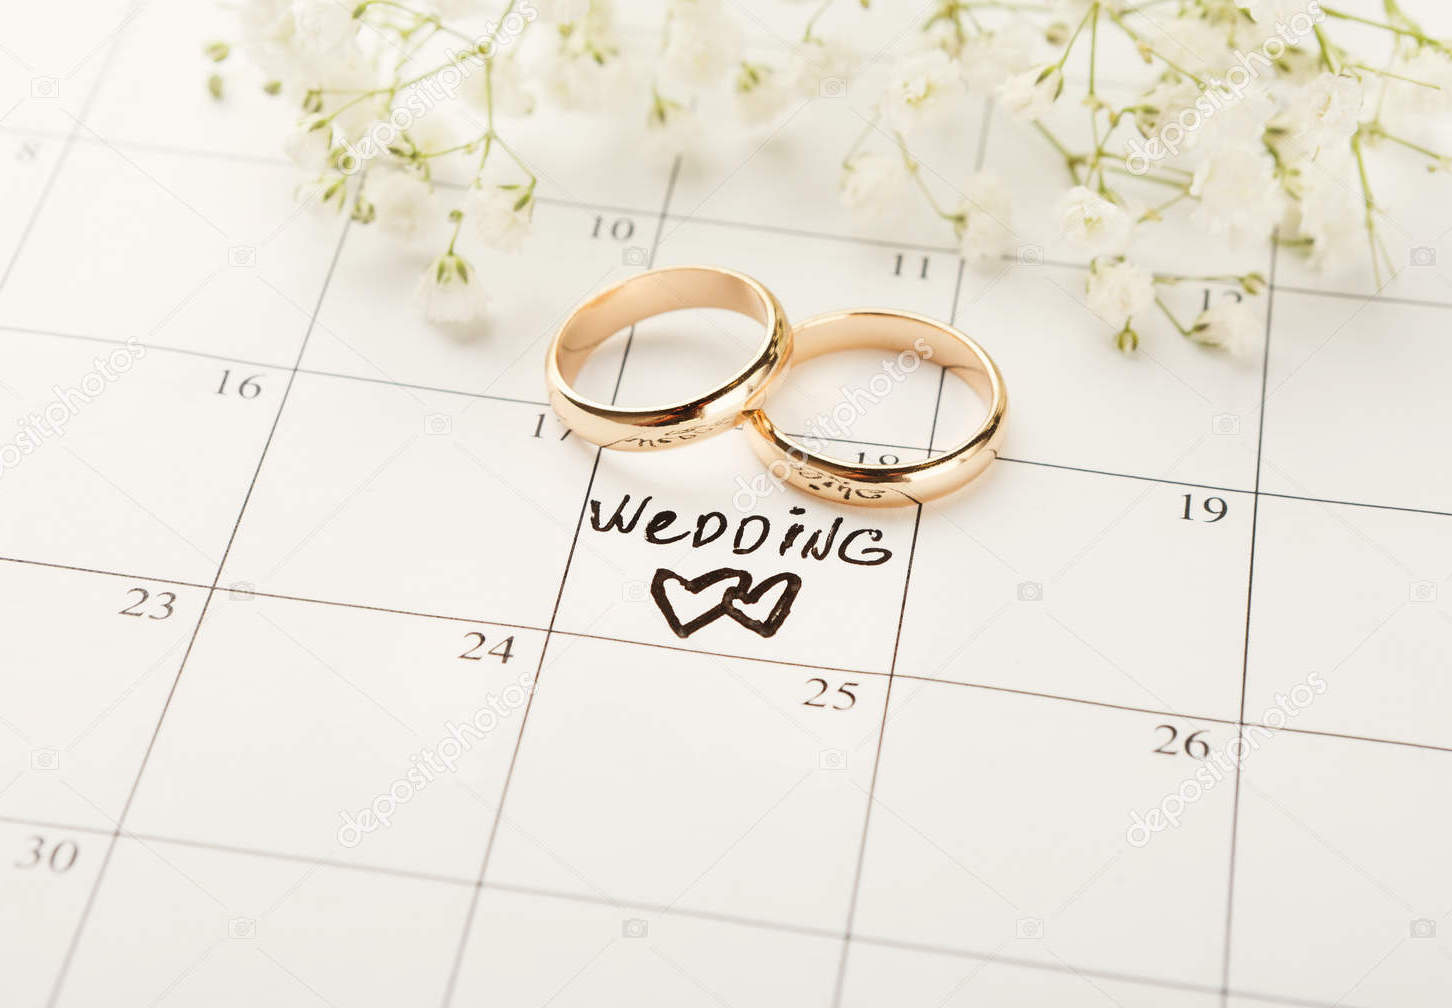 Four Reasons Why You Should Book Your Wedding Venue Early